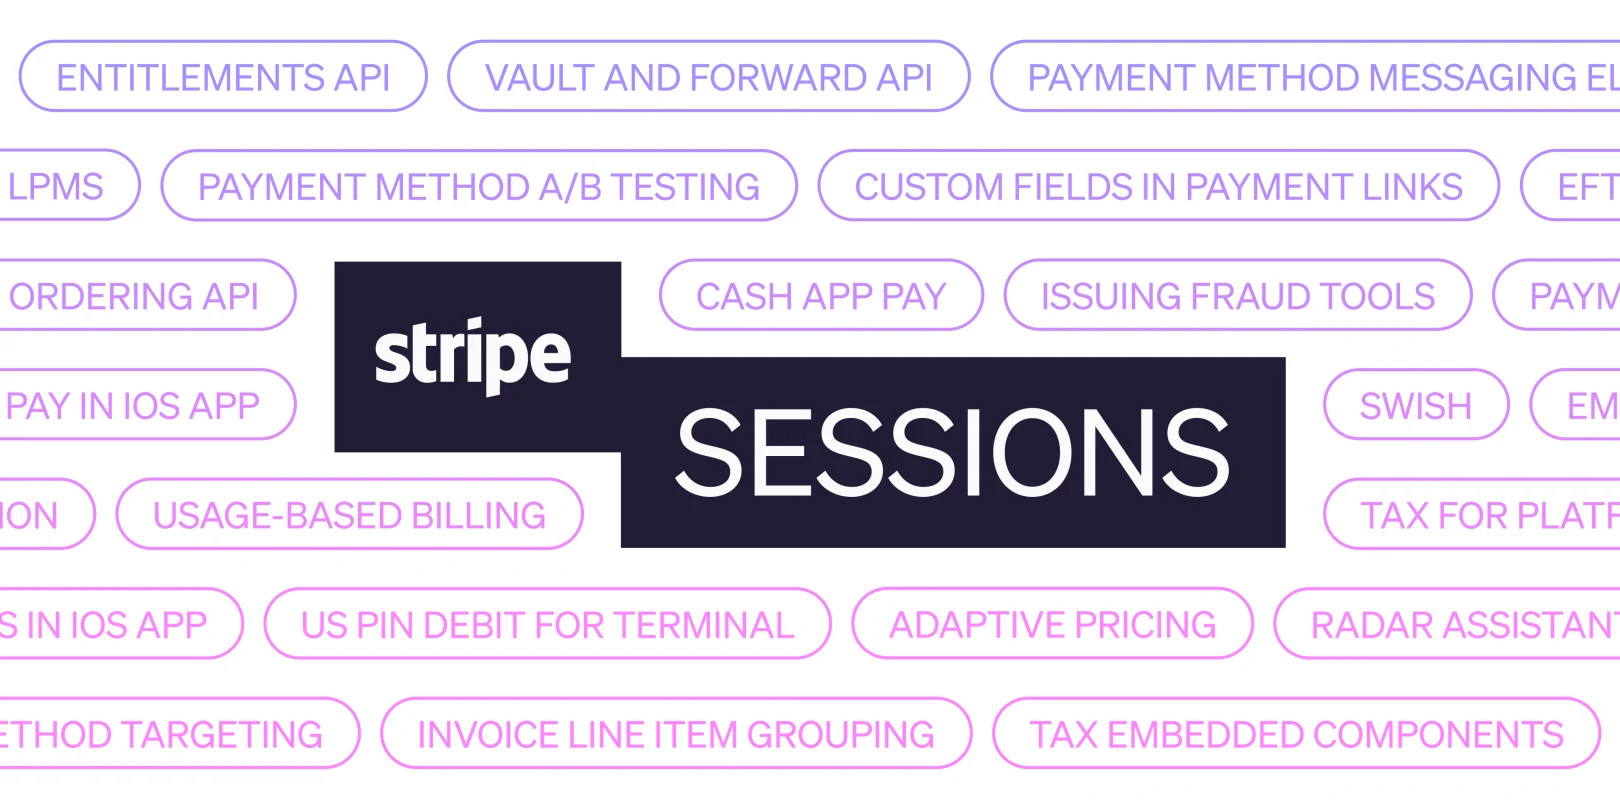 Stripe Revealed New Payment Options And Integrations, Focusing On Interoperability And User Experience.